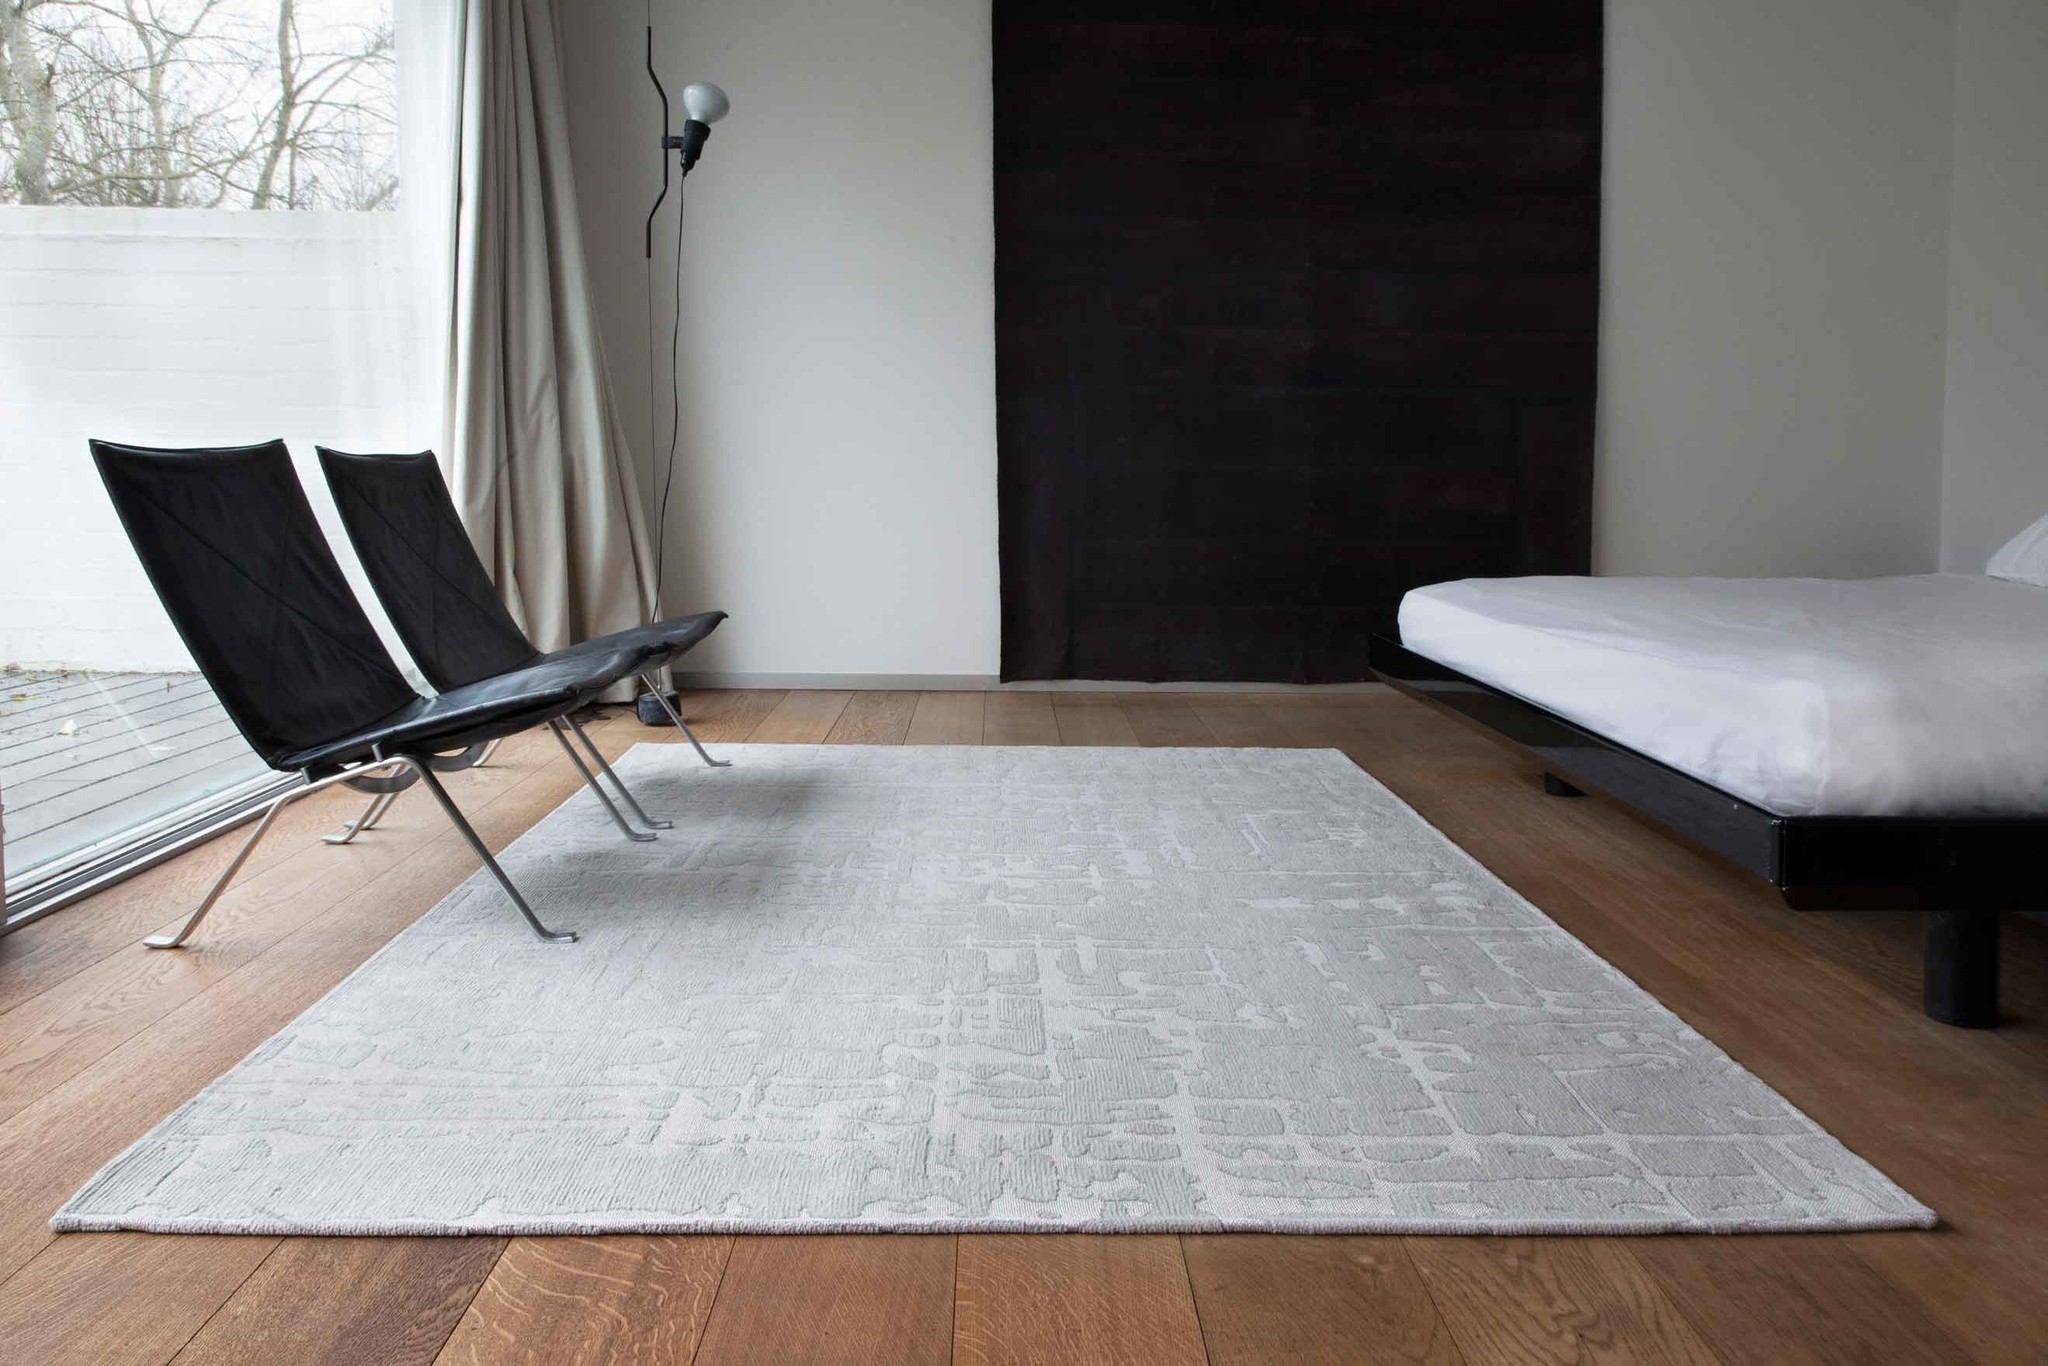 Abstract Silver Belgian Rug ☞ Size: 4' 7" x 6' 7" (140 x 200 cm)